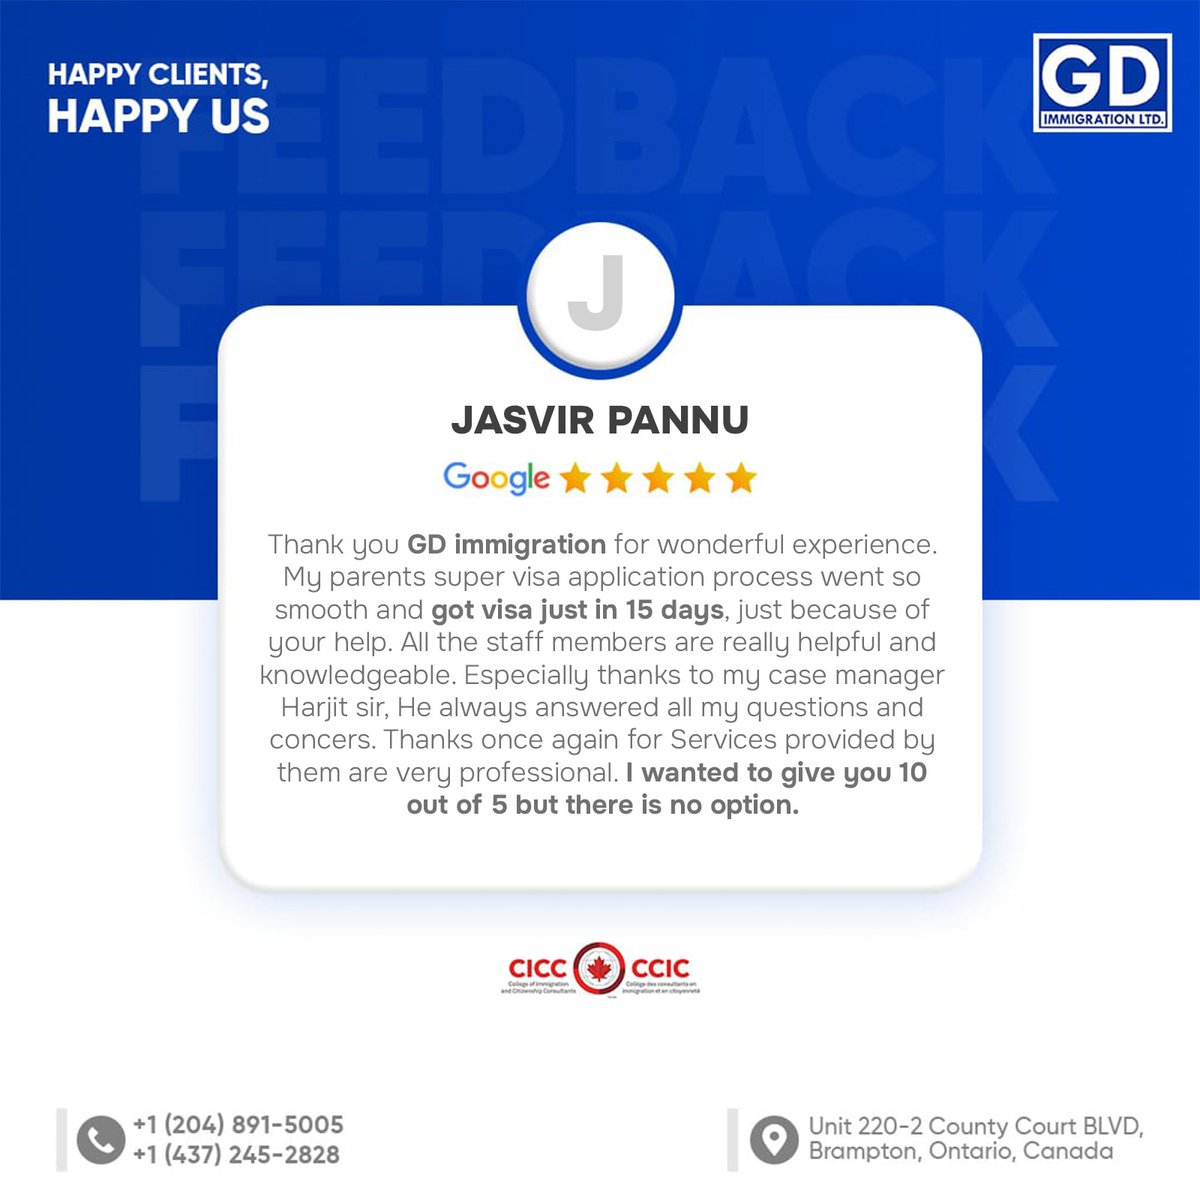 We're honored to receive such glowing feedback from Jasvir Pannu about their experience with GD Immigration!

#GDImmigration #Canada #GoogleReview #CanadaSuperVisa #Visa #exploreCanada #VisaApproval #ImmigrationConsultants #brampton #SuccessStory #Immigration #visa #punjab #india